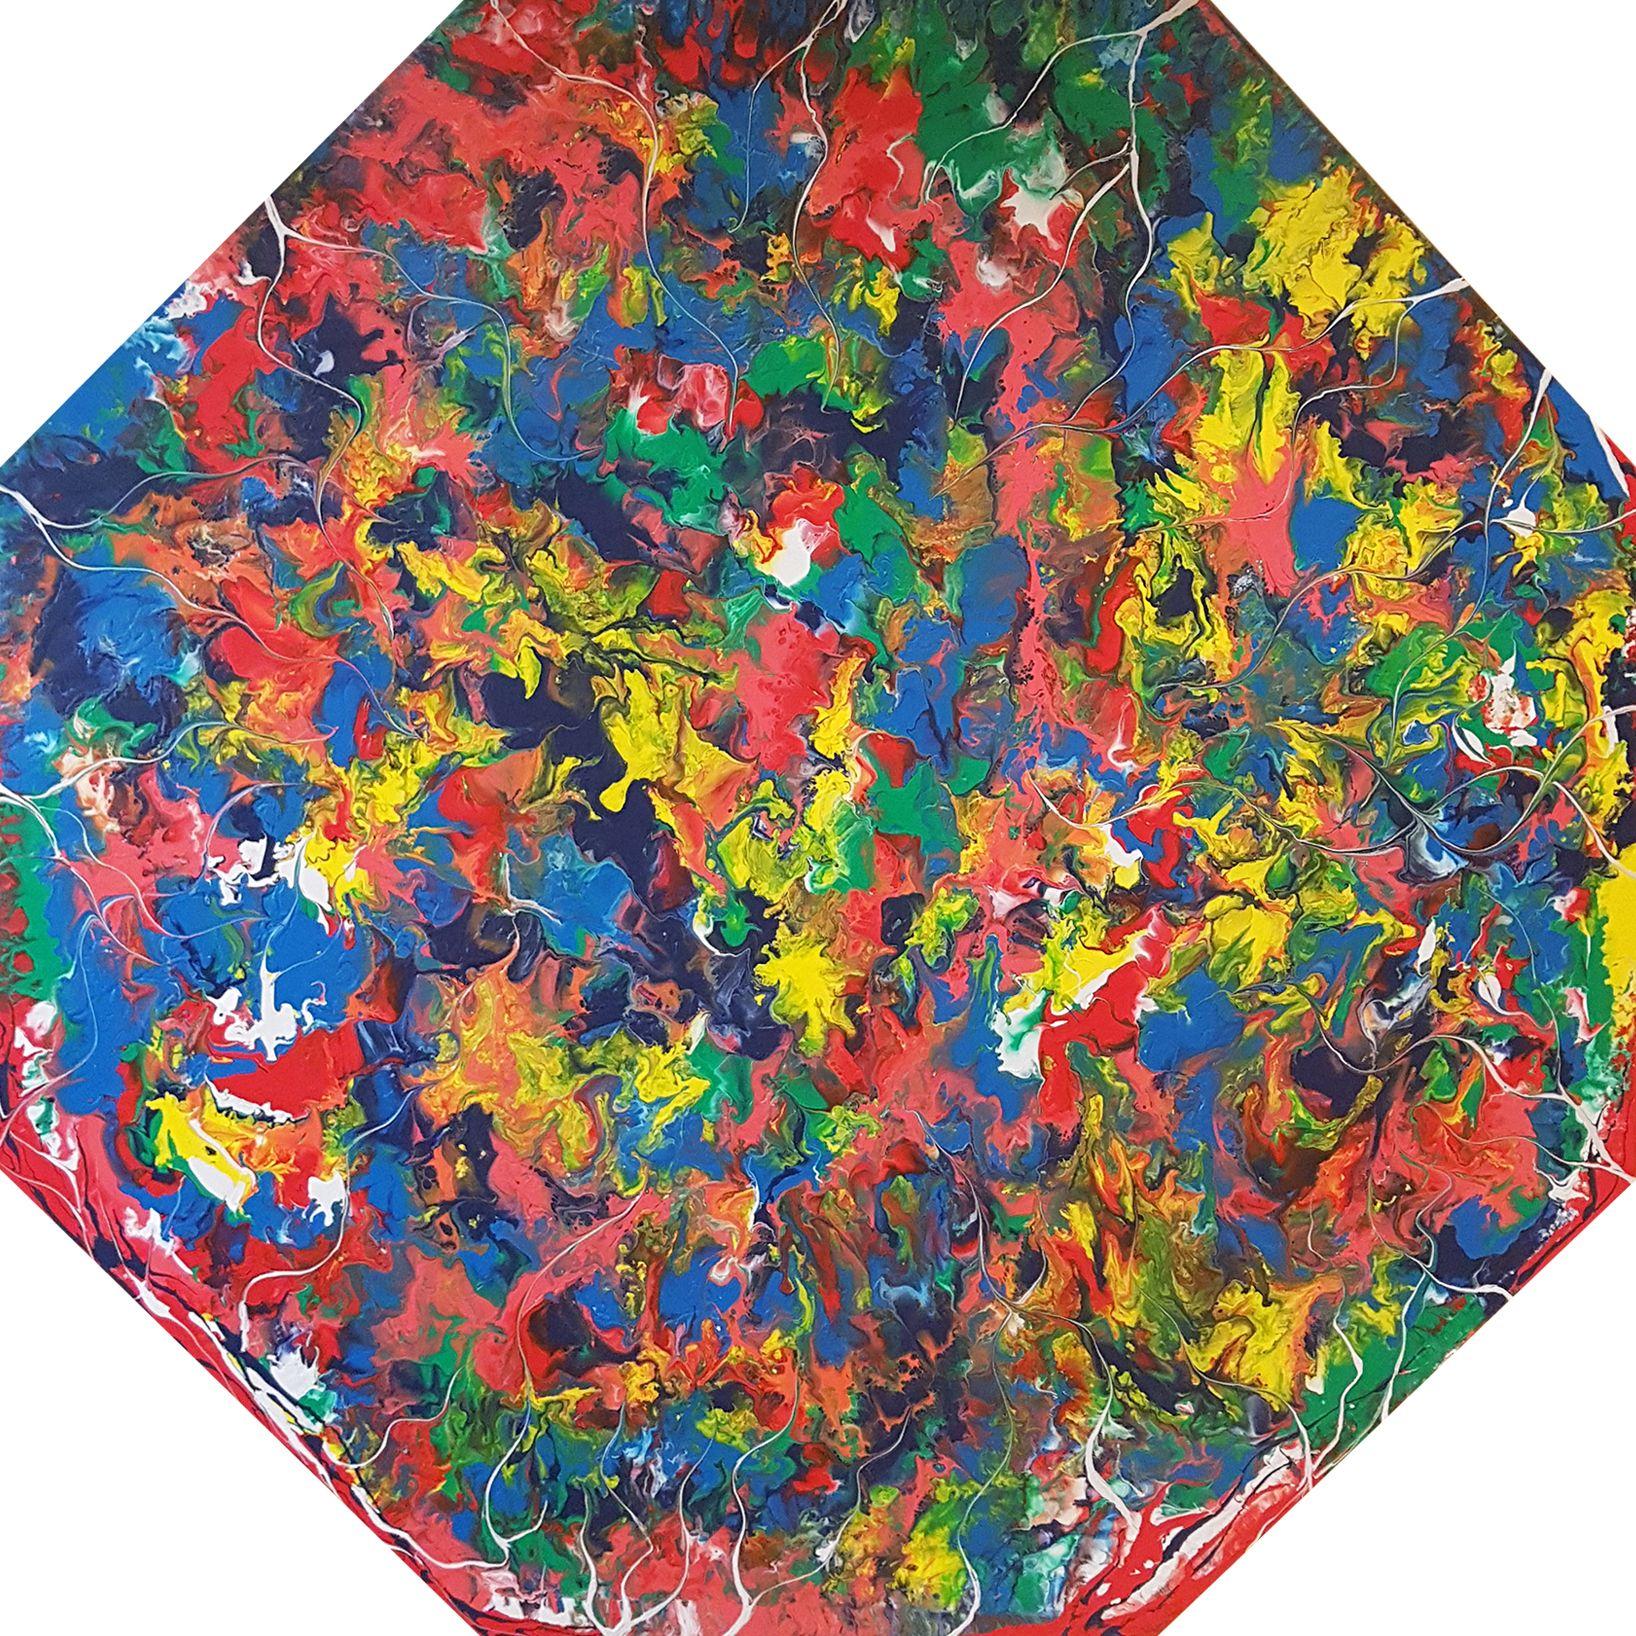 A large abstract expressionism painting with beautiful custom colours and textures. This painting is painted on a custom-made octagon-shaped canvas that my dad built, since I couldn't find anything like this online so he built it and I painted it